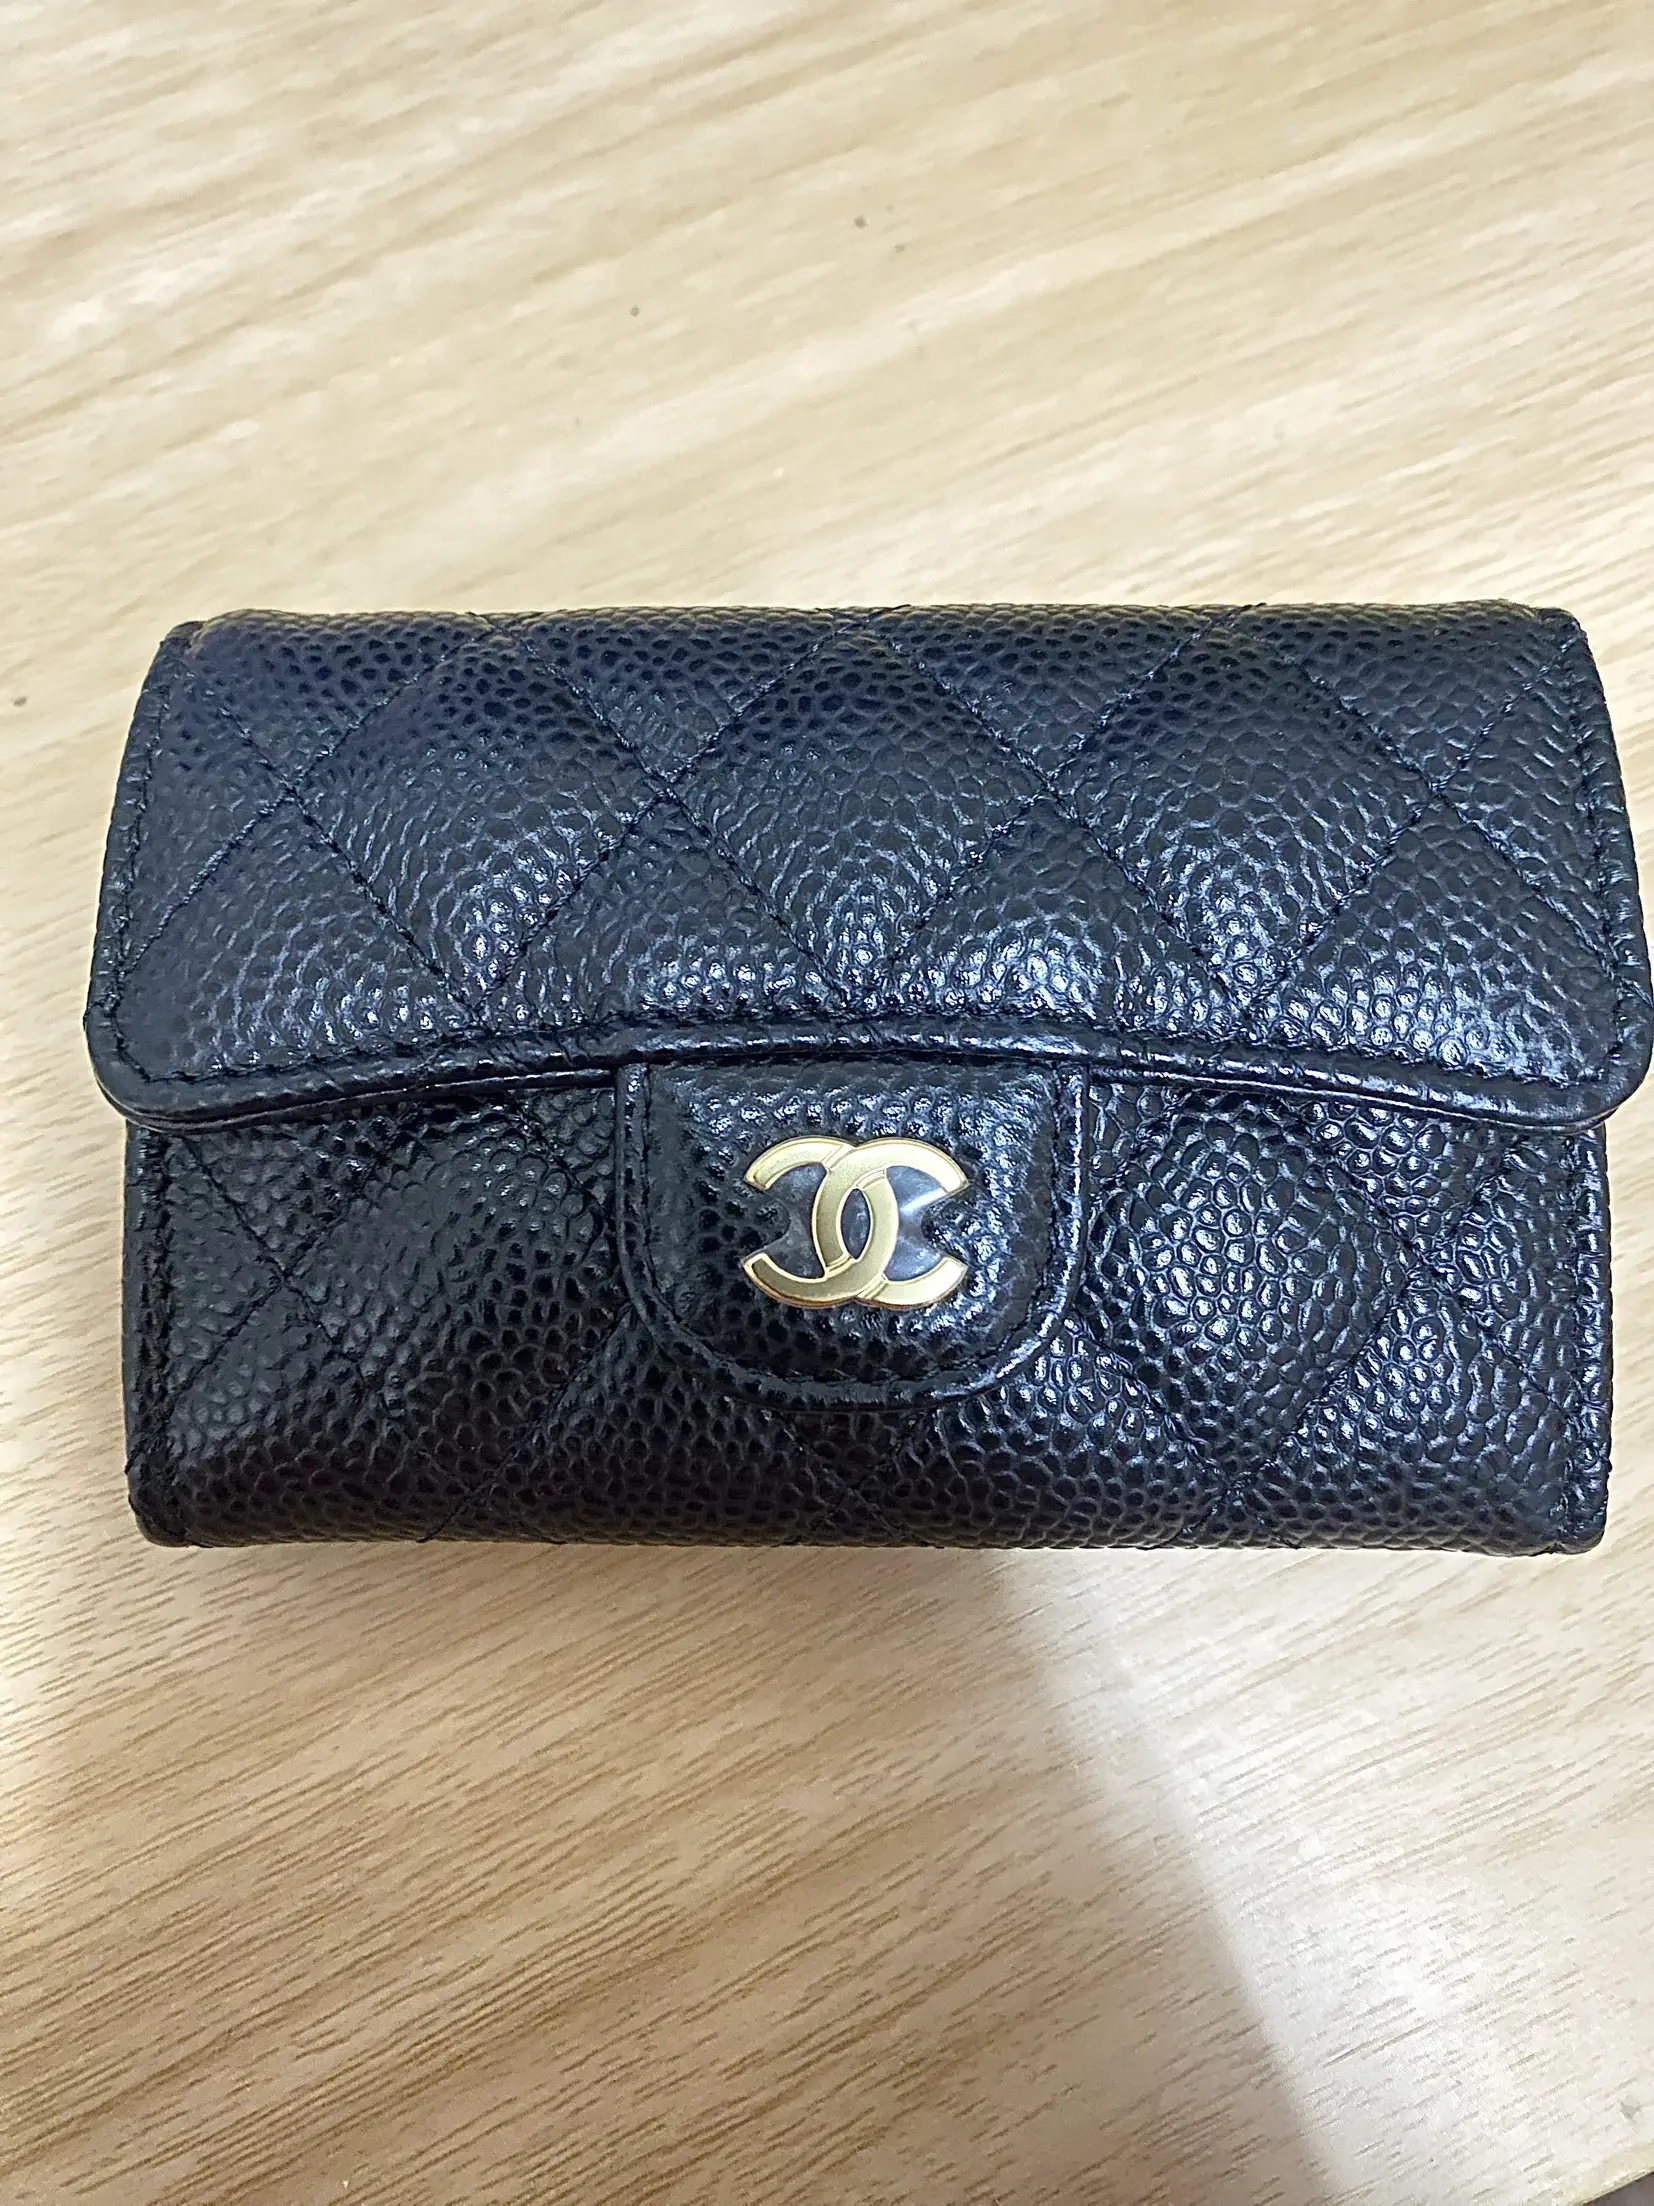 Chanel card holder. The bag is awesome. ✨, Gallery posted by Peanut